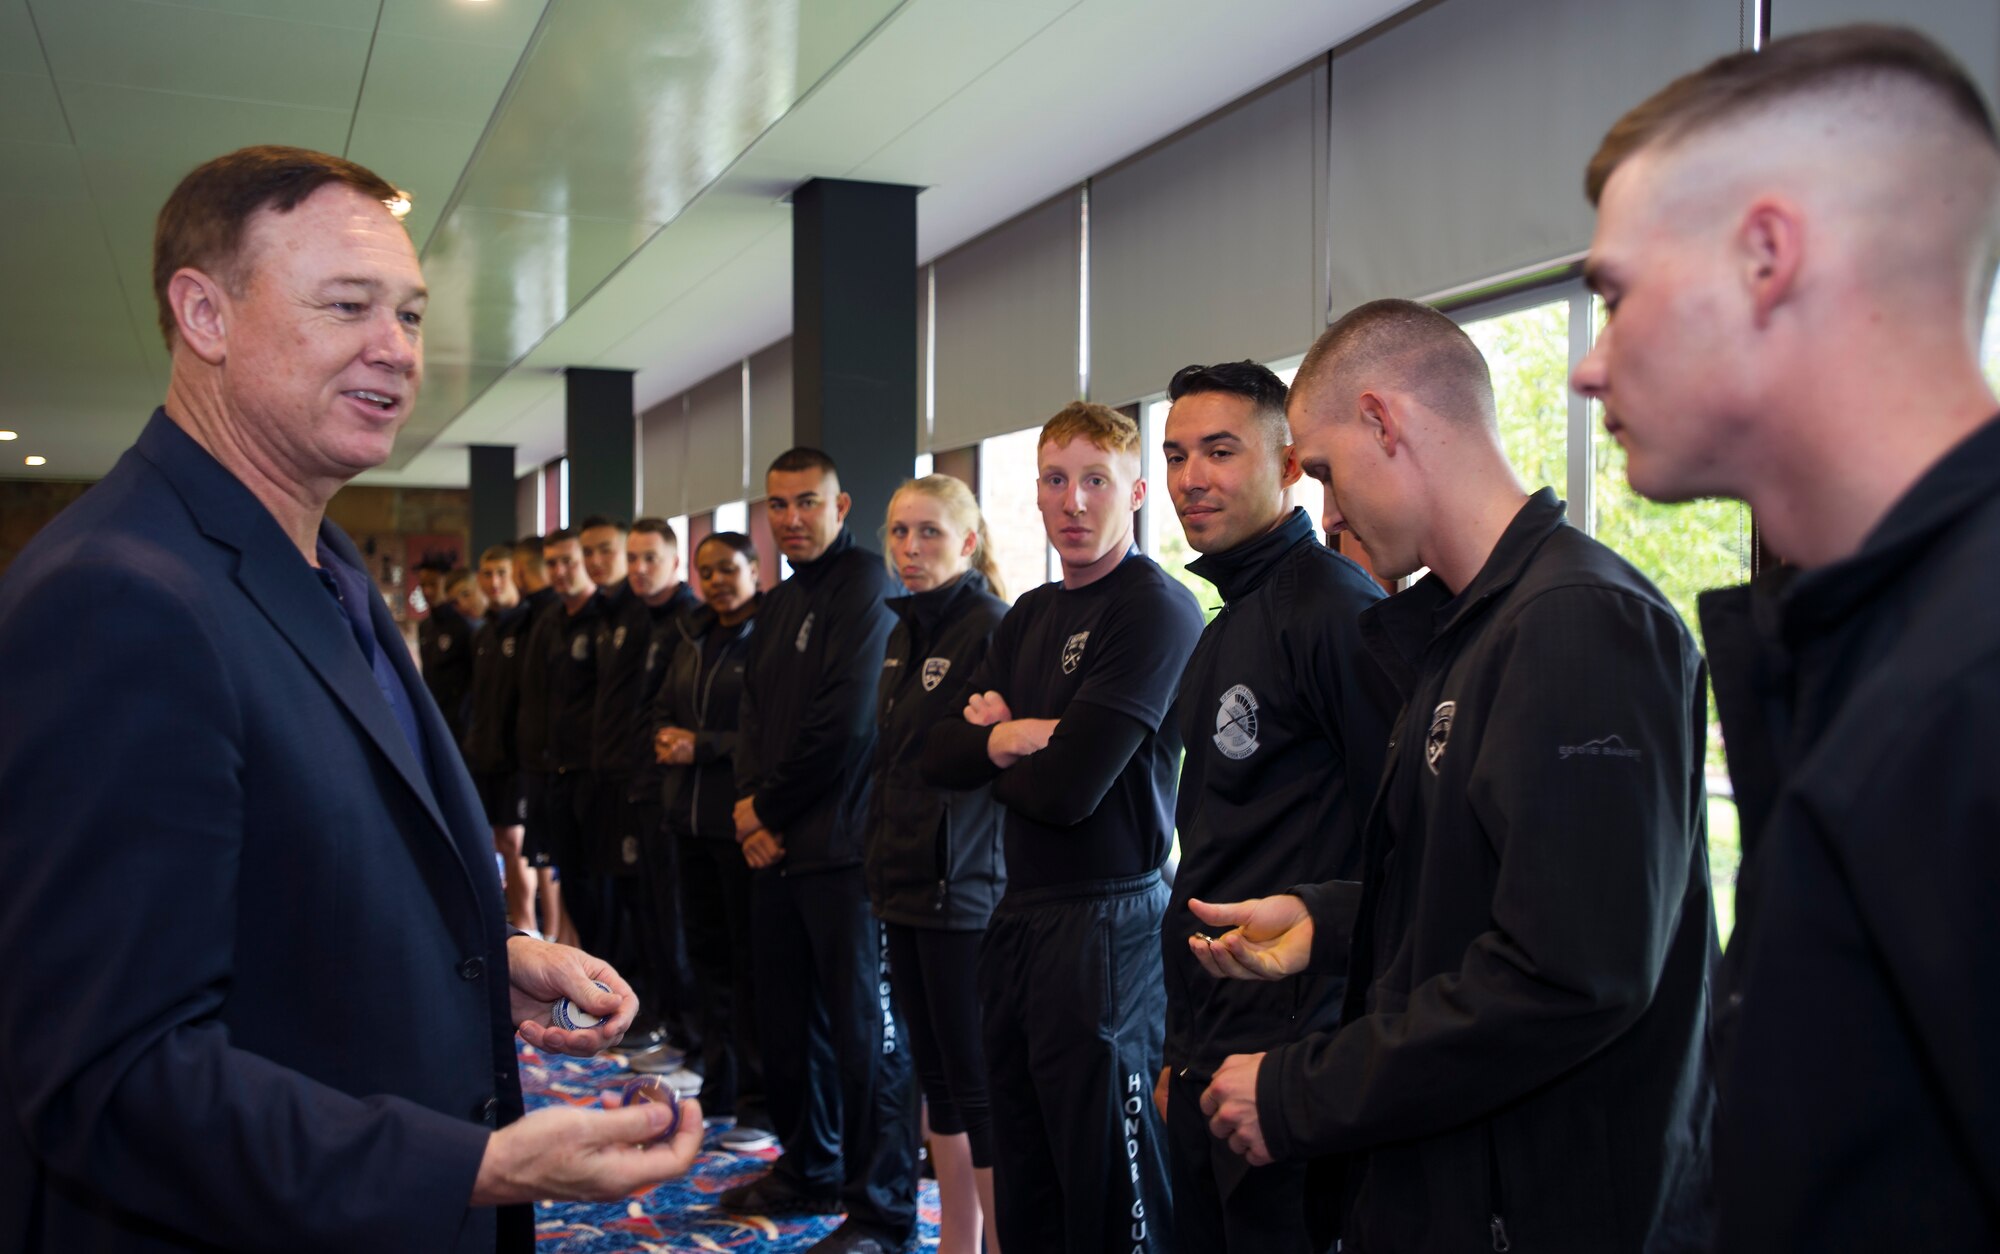 Maj. Gen. Darryl Burke, Air Force District of Washington commander, speaks with members of the United States Air Force Honor Guard Drill Team in Edinburgh, Scotland, Aug. 14, 2015. The honor guard was recognized for their participation in The Royal Edinburgh Military Tattoo. 20 members of the U.S. Honor Guard Drill team traveled to the United Kingdom to represent the USAF and the Department of Defense as the only branch of military service from the U.S. performing in the tattoo. The 66th production of the tattoo welcomed more than 220,000 spectators from around the world for a span of more than three weeks. (U.S. Air Force photo/Staff Sgt. Nichelle Anderson/released)